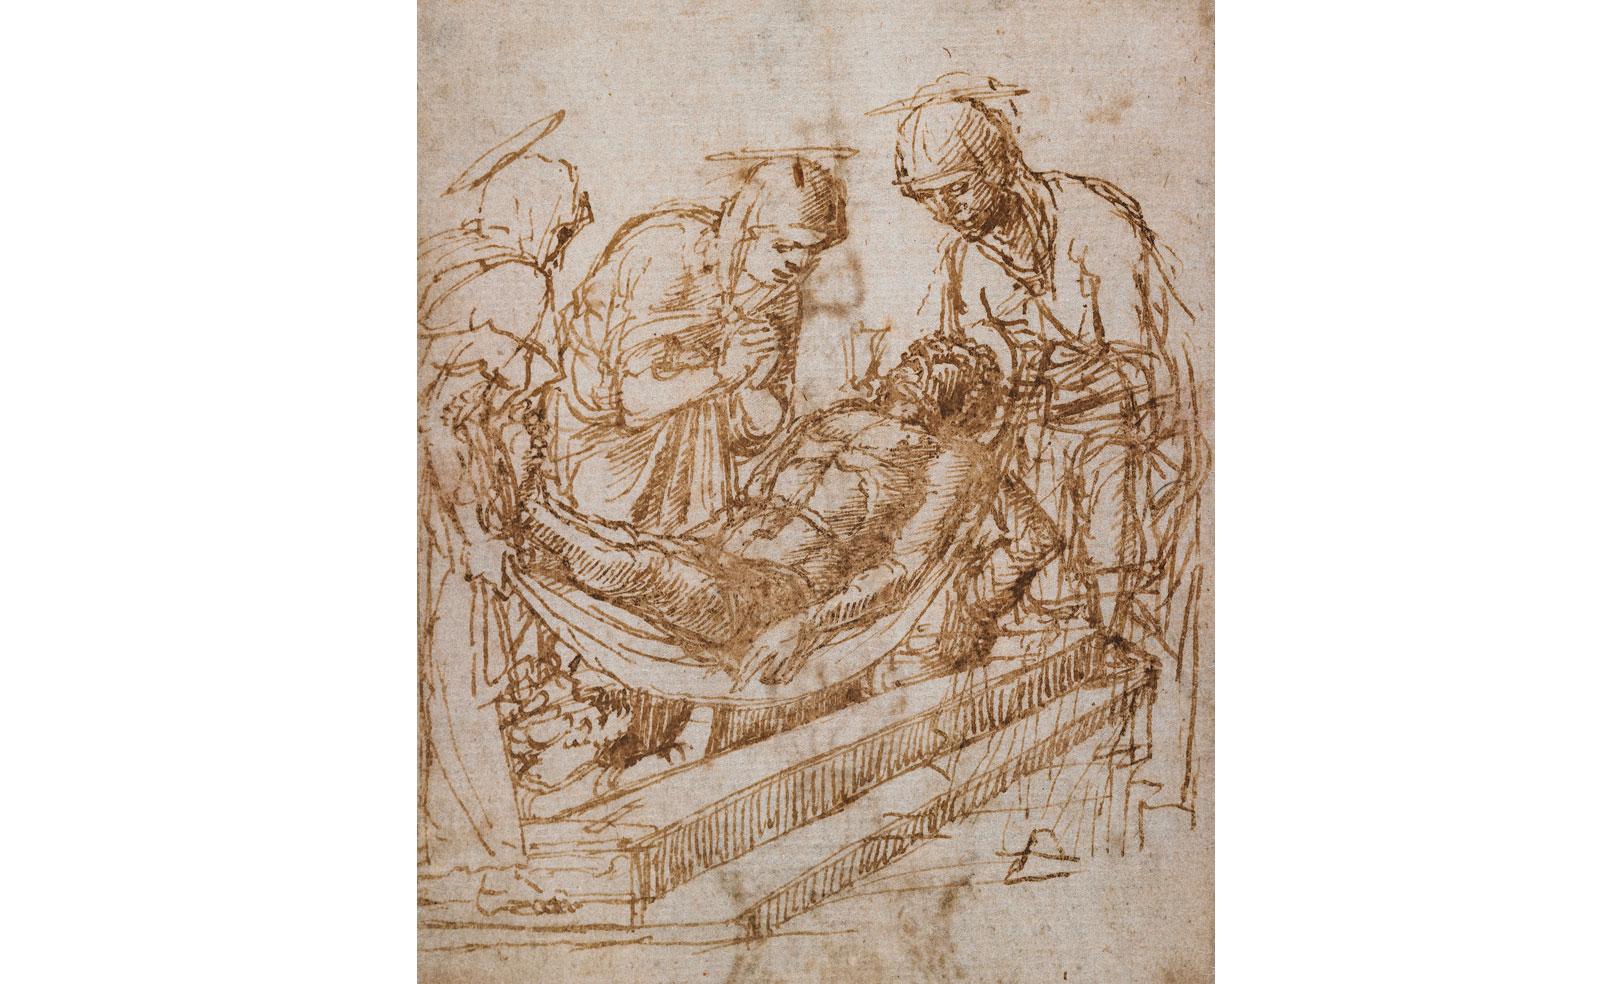 Deposition by Andrea Mantegna.